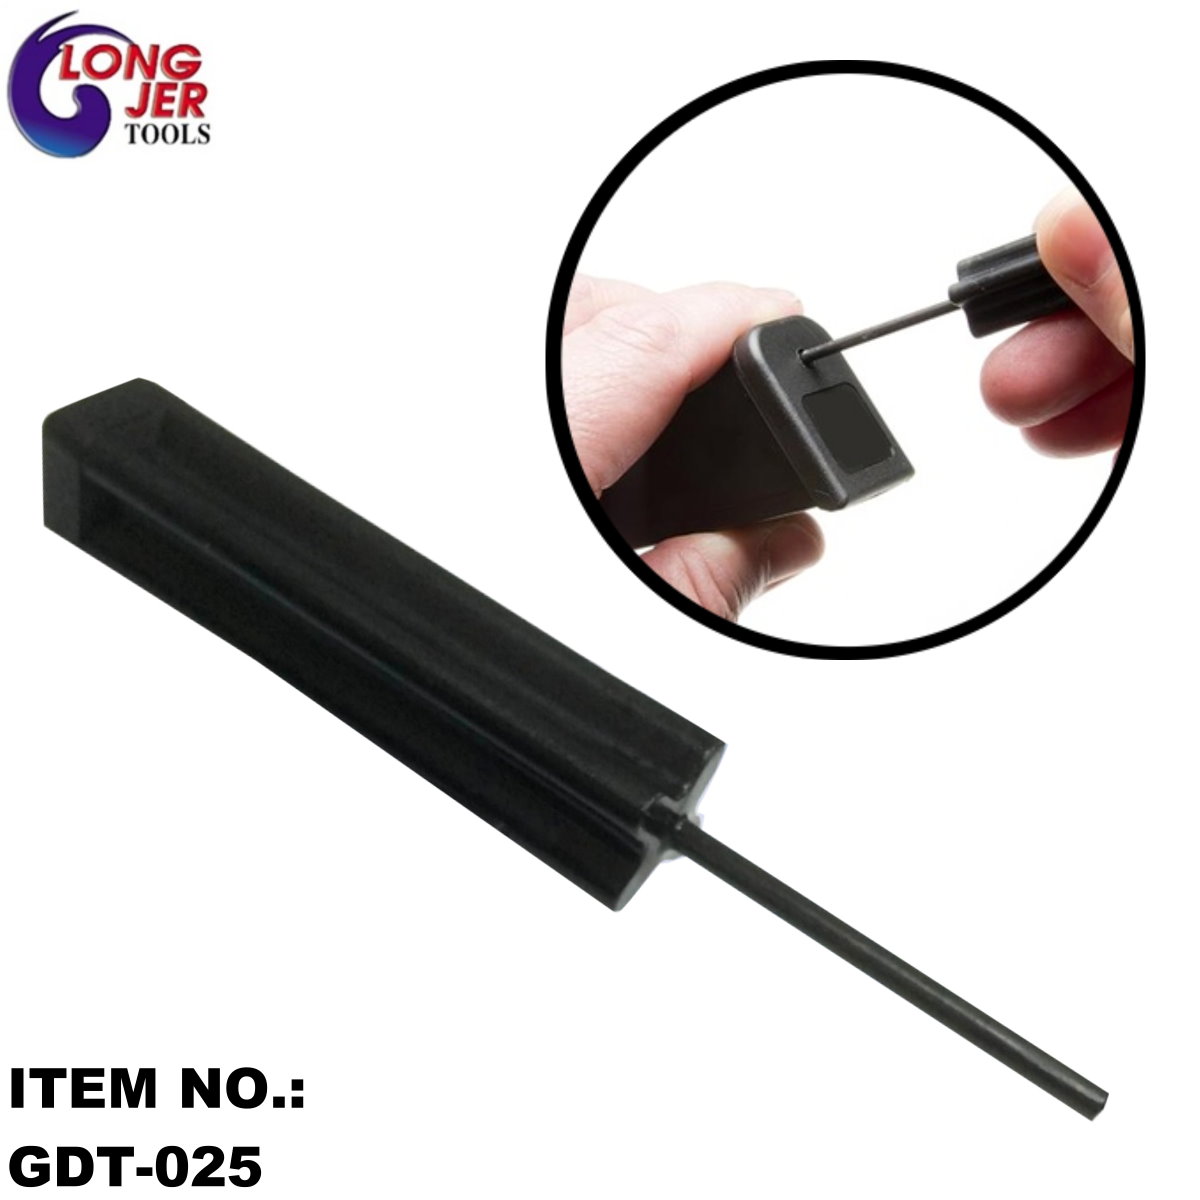 STEEL PUNCH (PIN TAP OUT TOOL)/METAL PIN PUNCH TOOLS